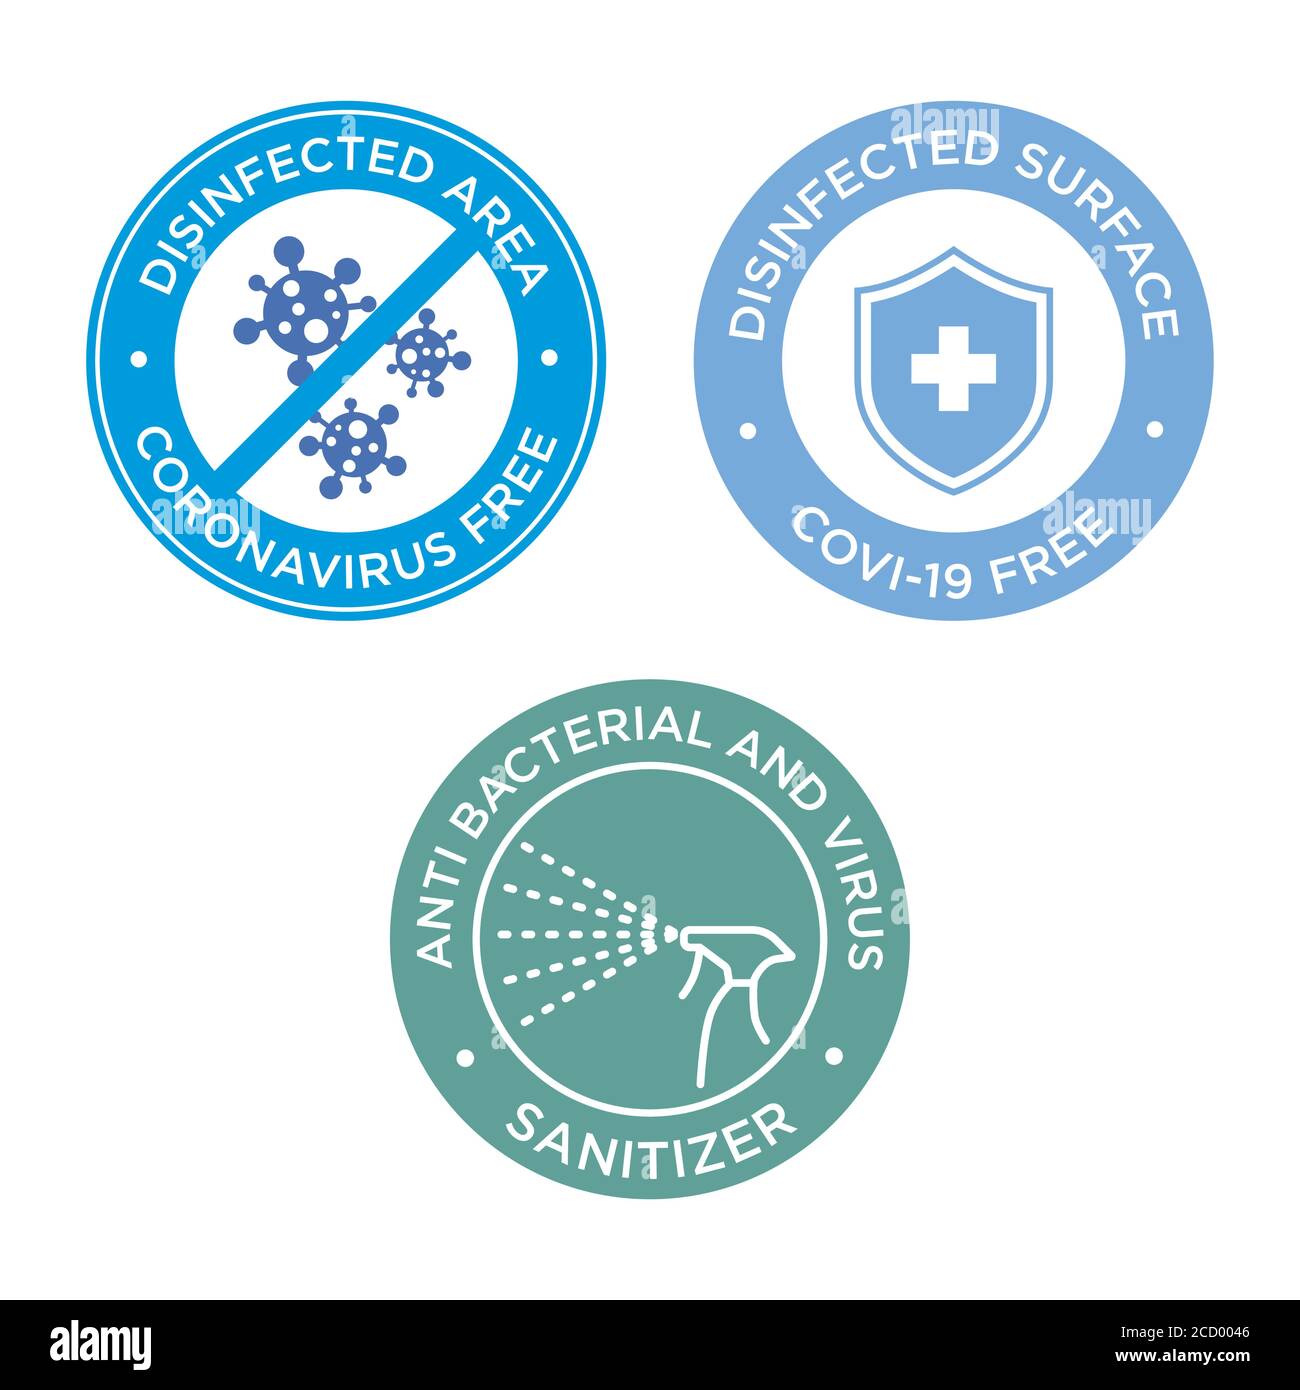 Coronavirus free icon set. Round symbols for disinfected areas, surfaces or products of covid-19. Stock Vector